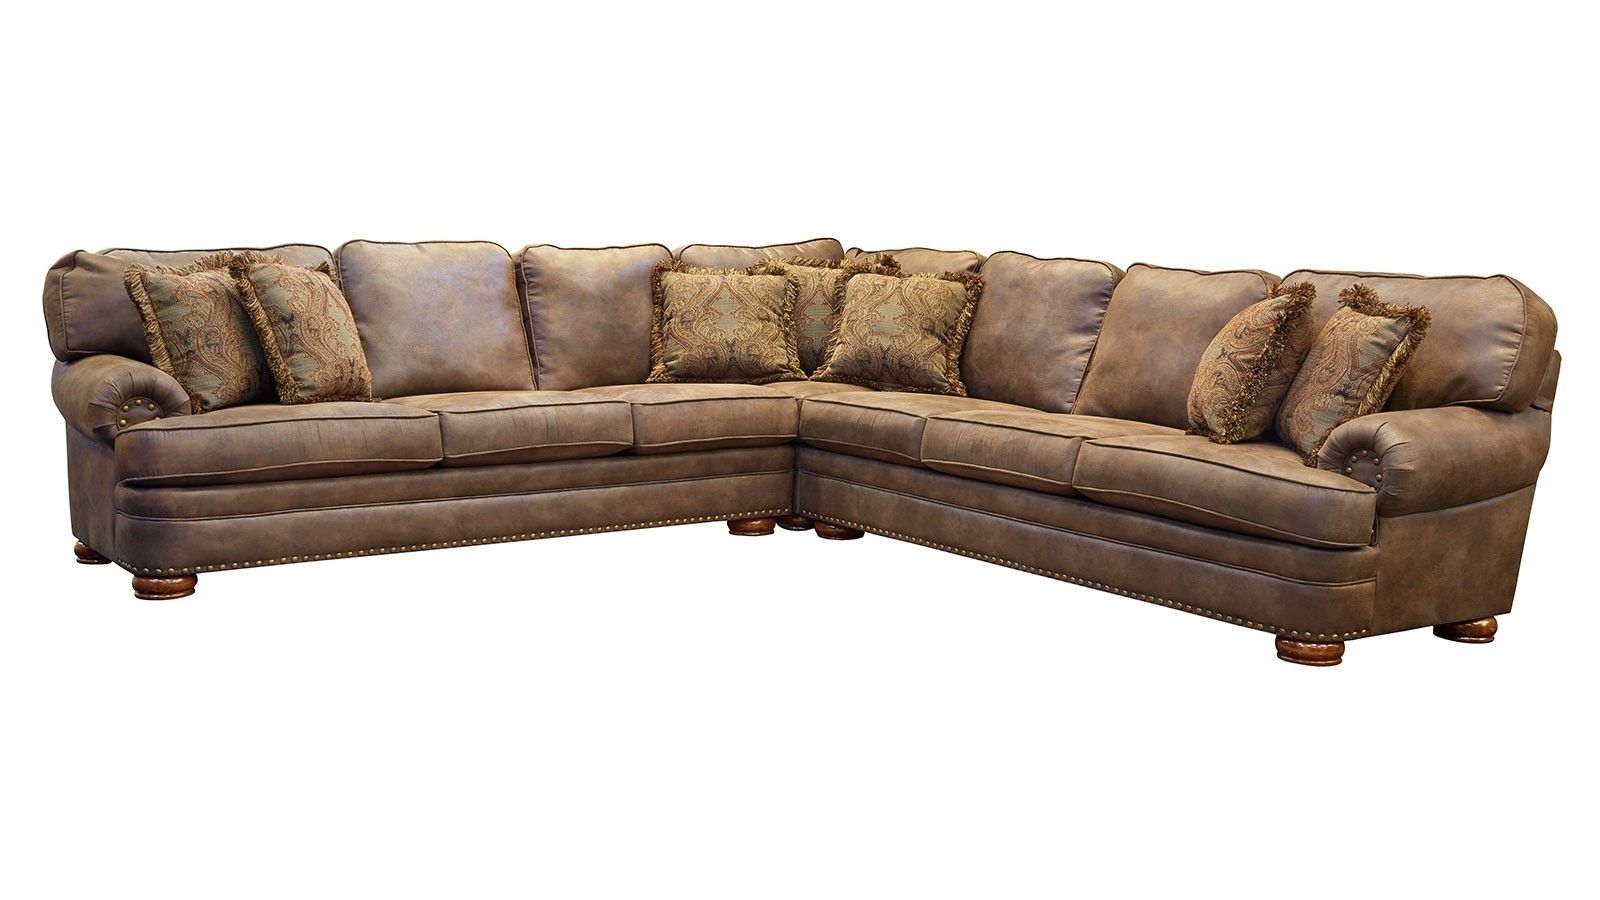 El Paso Sectional | Gallery Furniture With El Paso Sectional Sofas (View 1 of 10)